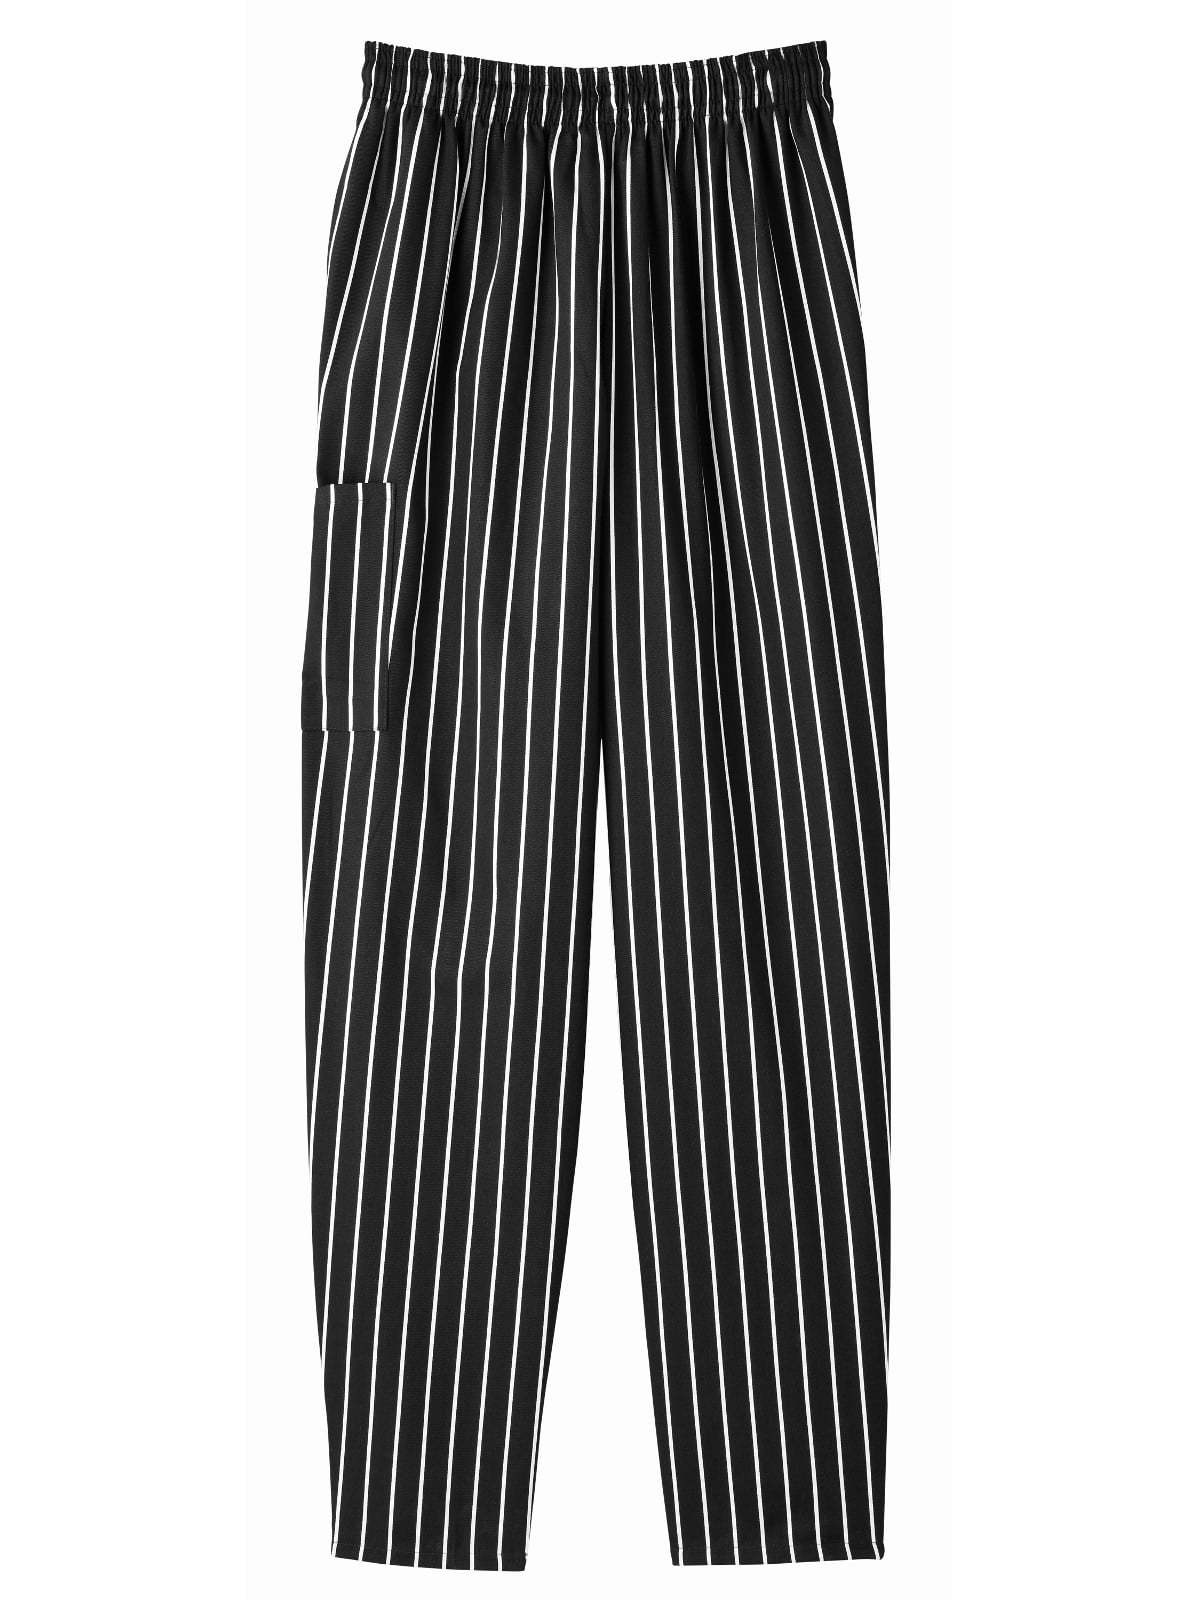 Five Star Chef Apparel 18100 Unisex Pull-On Baggy Pant 